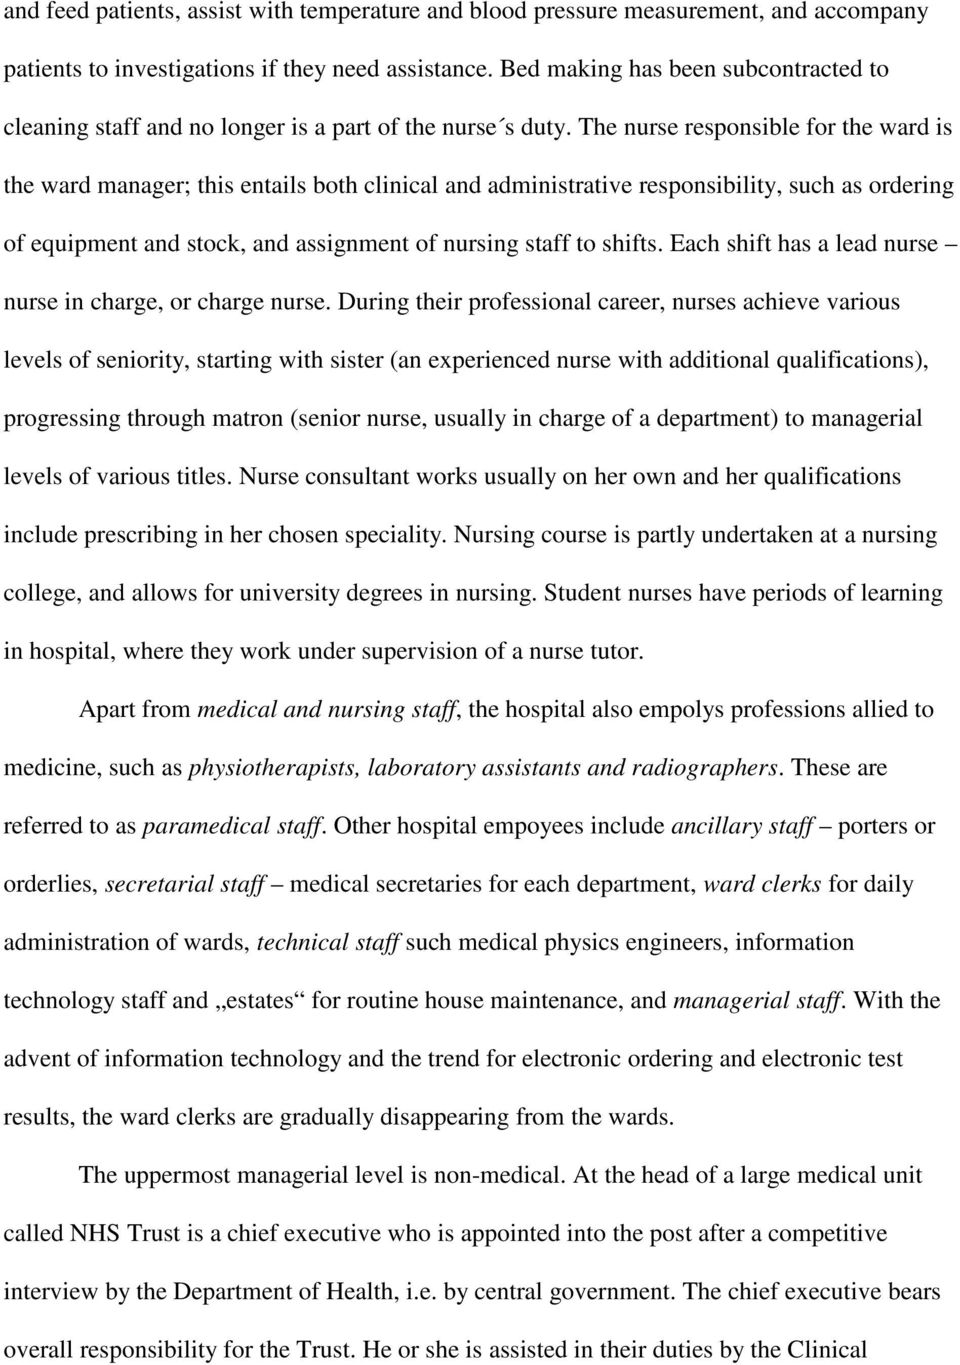 The nurse responsible for the ward is the ward manager; this entails both clinical and administrative responsibility, such as ordering of equipment and stock, and assignment of nursing staff to